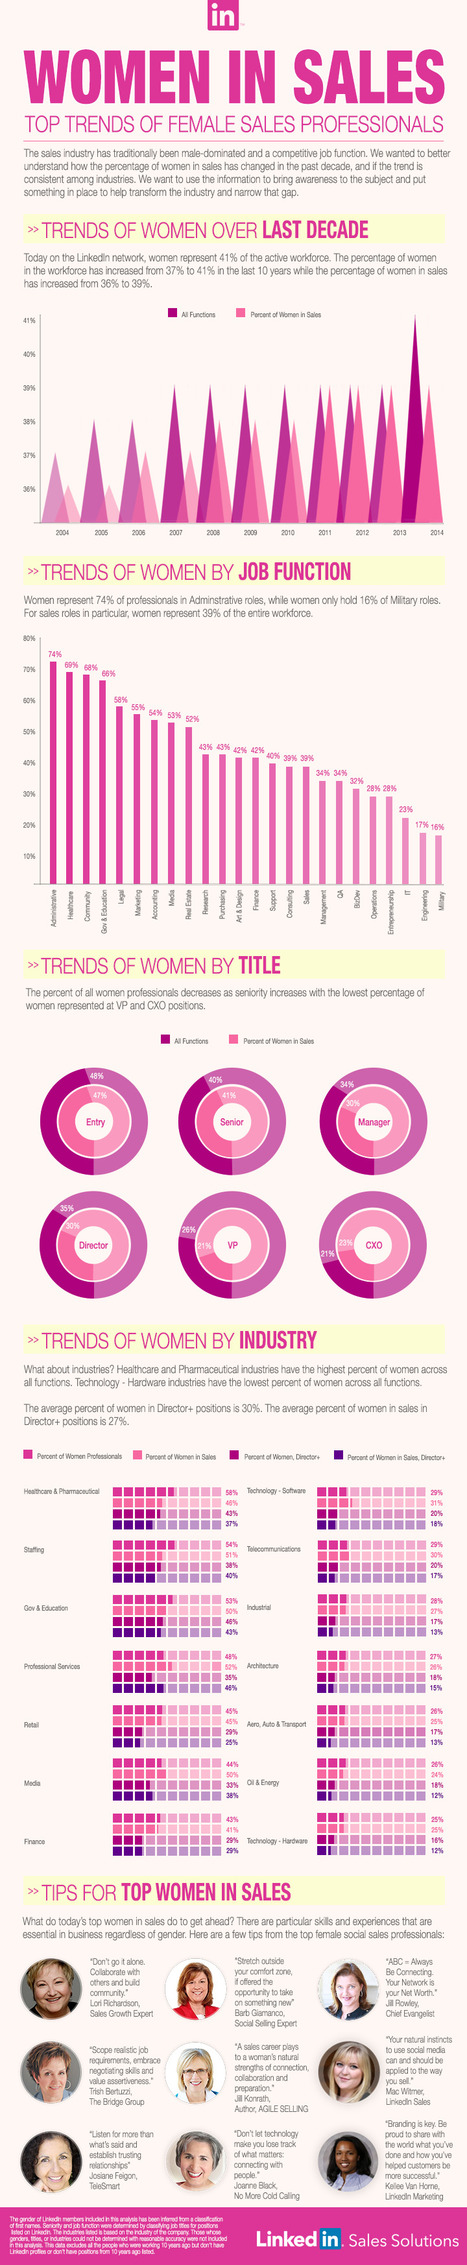 LinkedIn Releases New Trend Data About Women in Sales [Infographic] - HubSpot | Soup for thought | Scoop.it